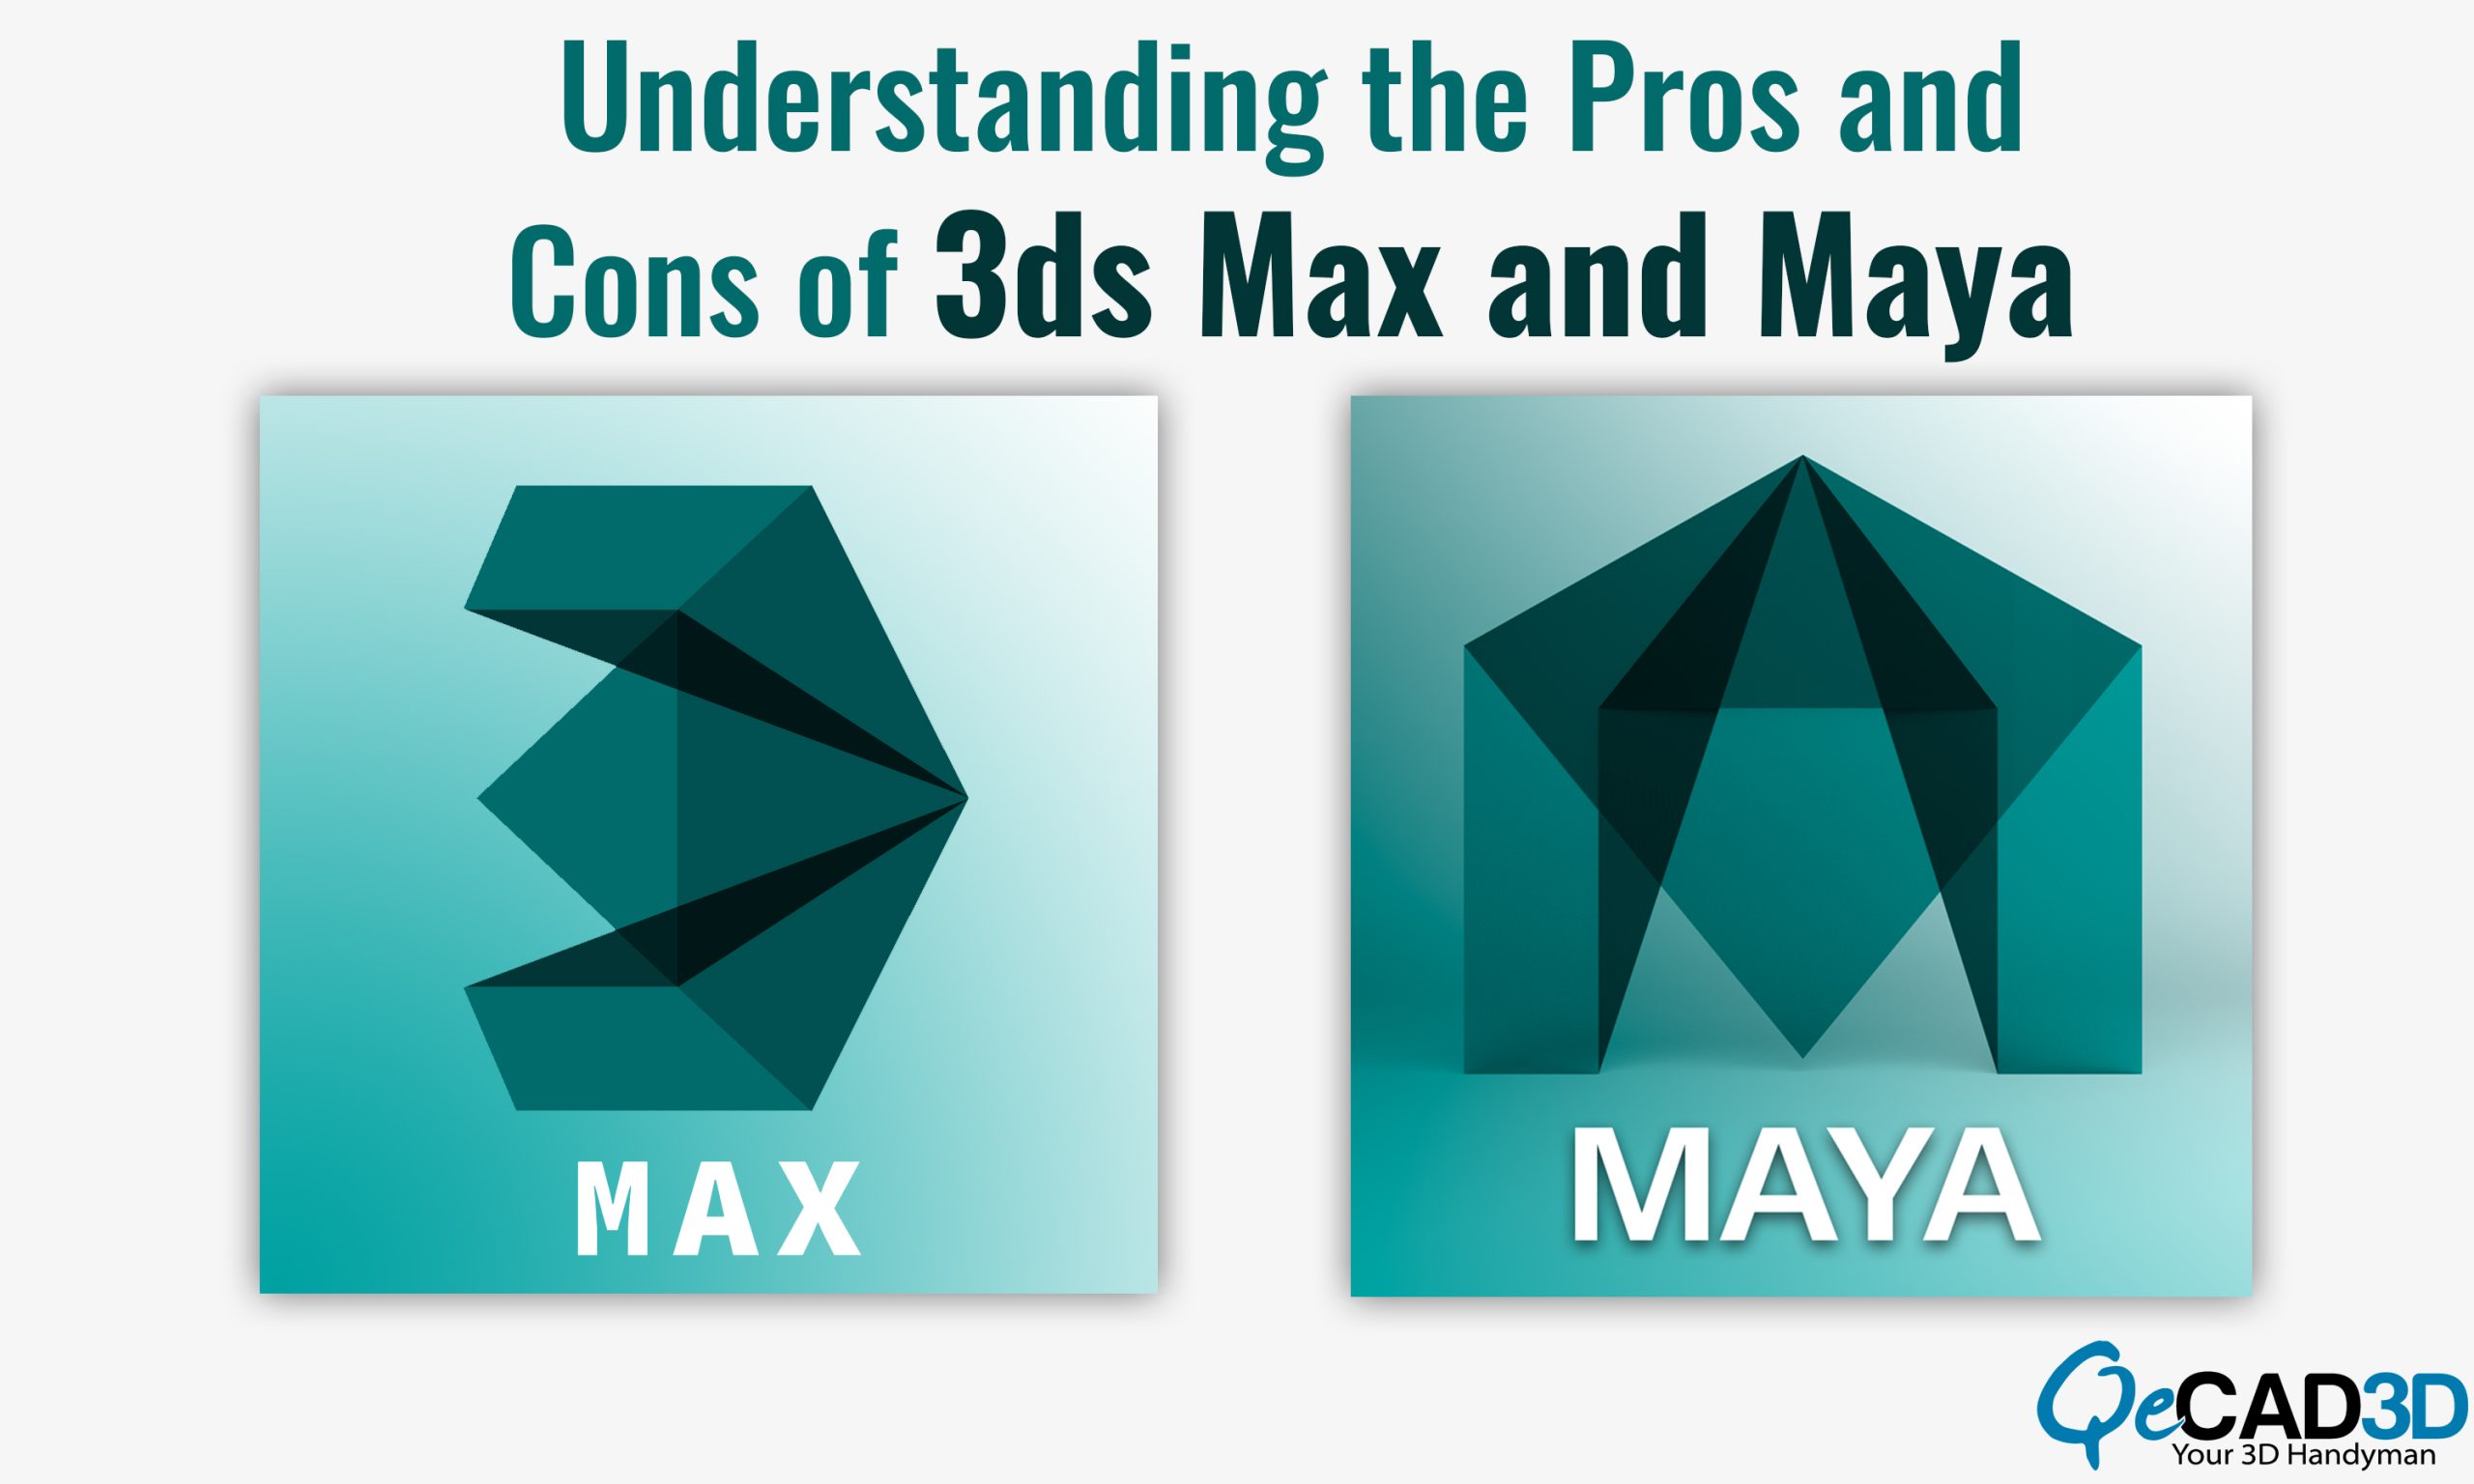 Understanding the Pros and Cons of 3ds Max and Maya